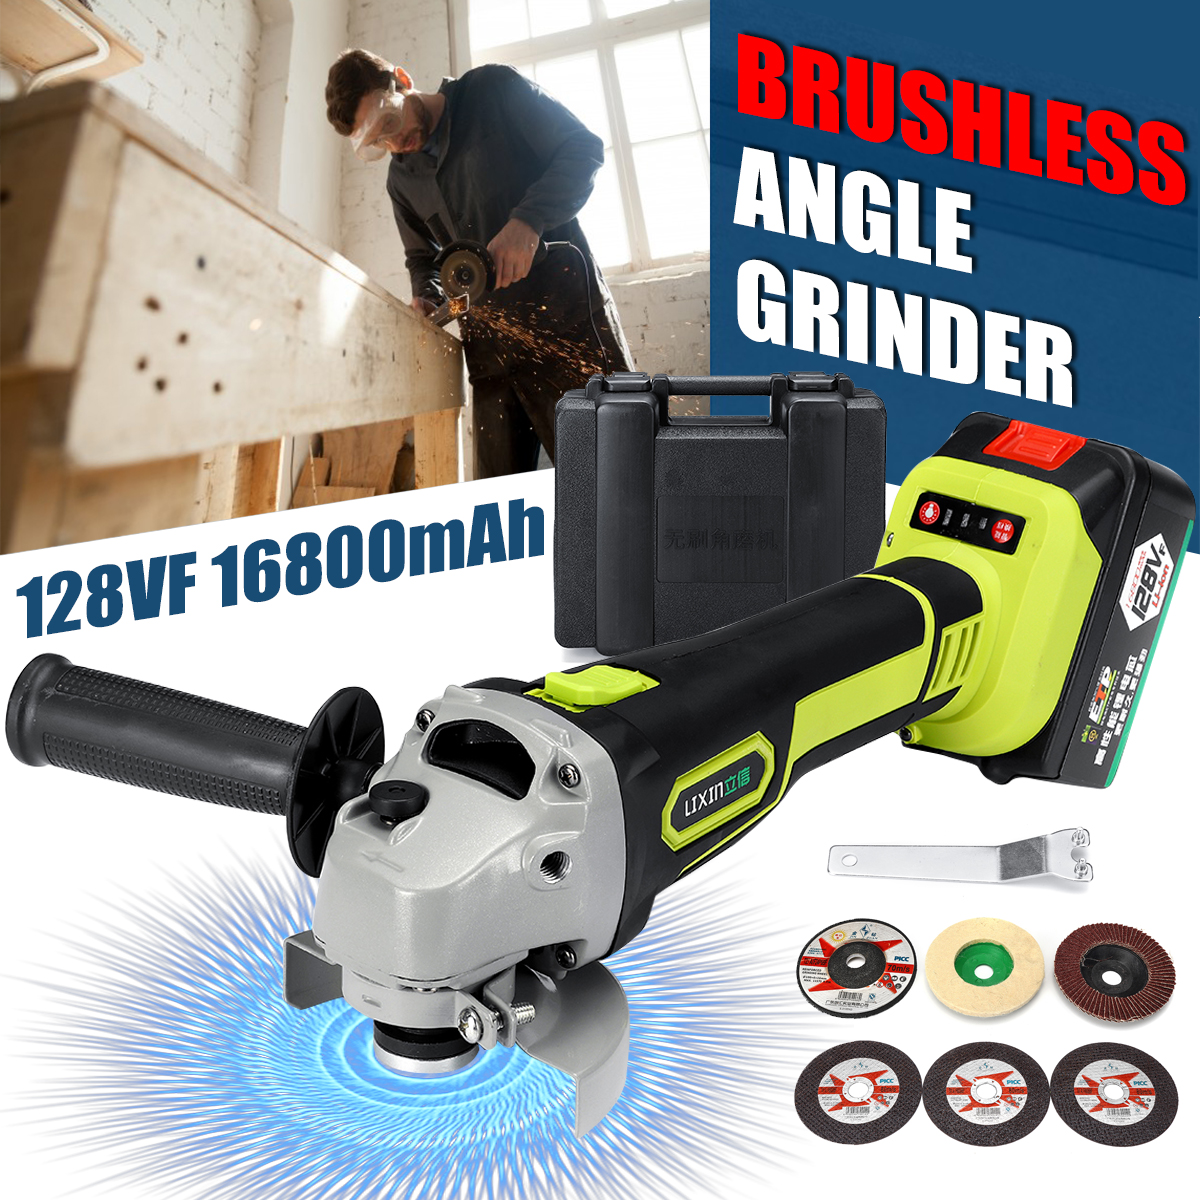 128VF 16800mAh Cordless Electric Angle Grinder Brushless Power Cutting Angle Grinding Tool with Li-ion Battery& Charger